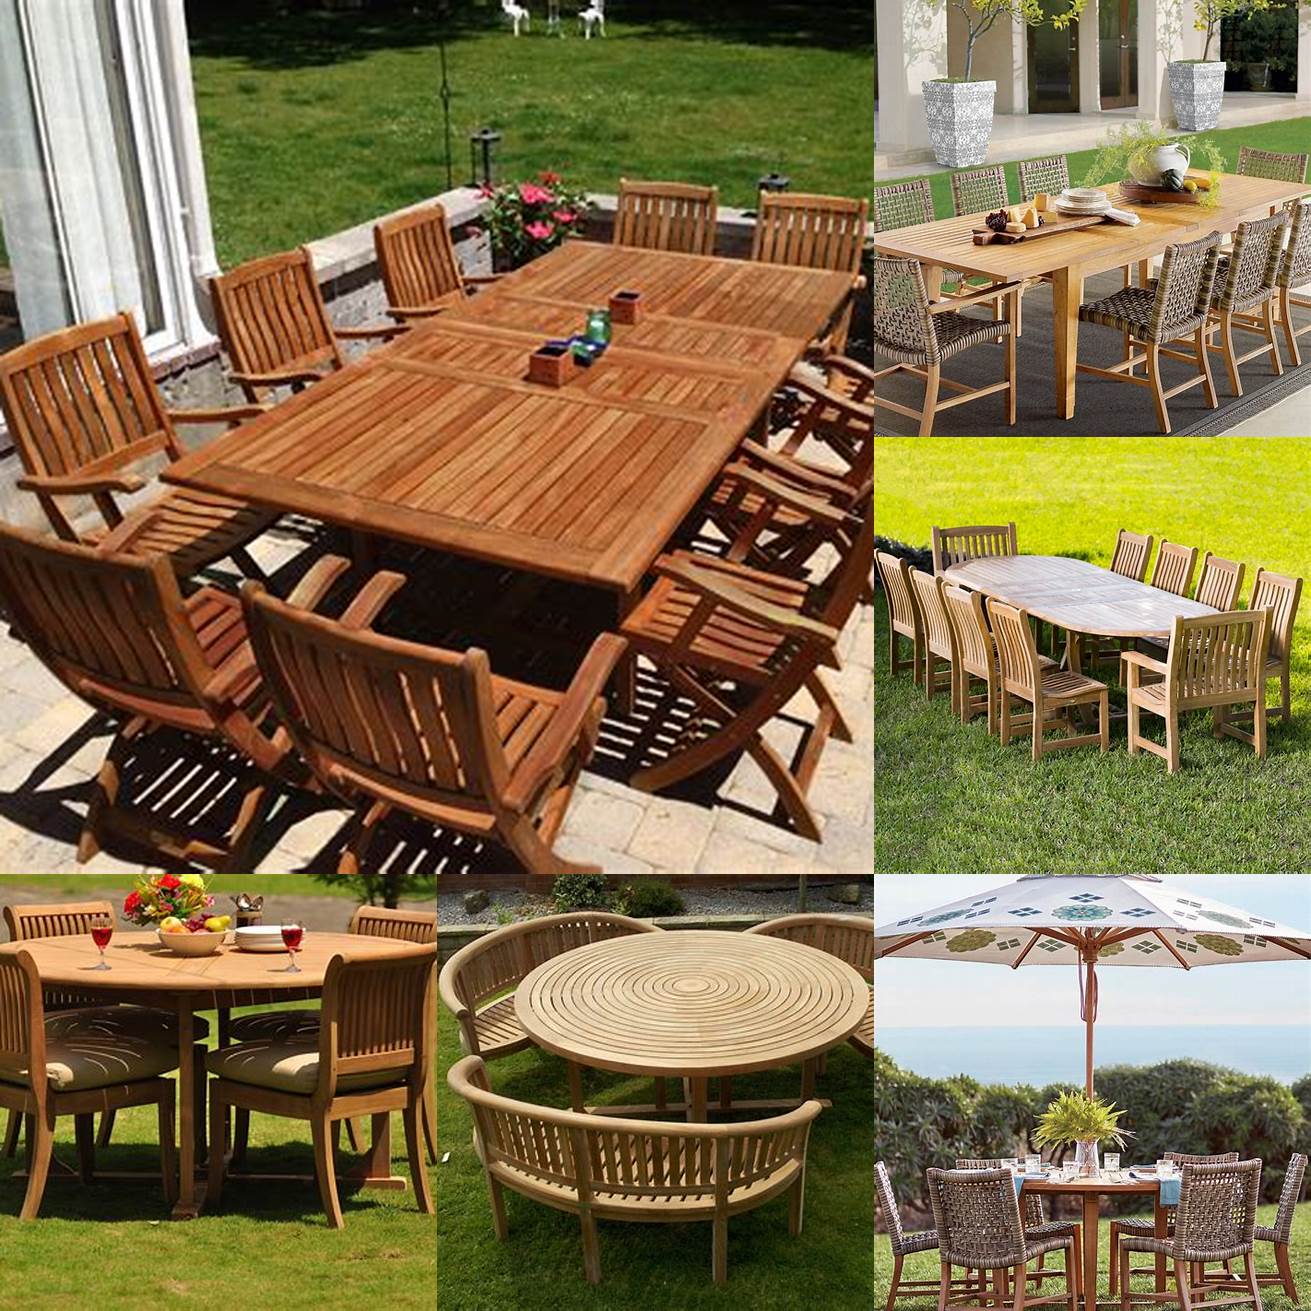 Image of Teak Furniture in Different Climates